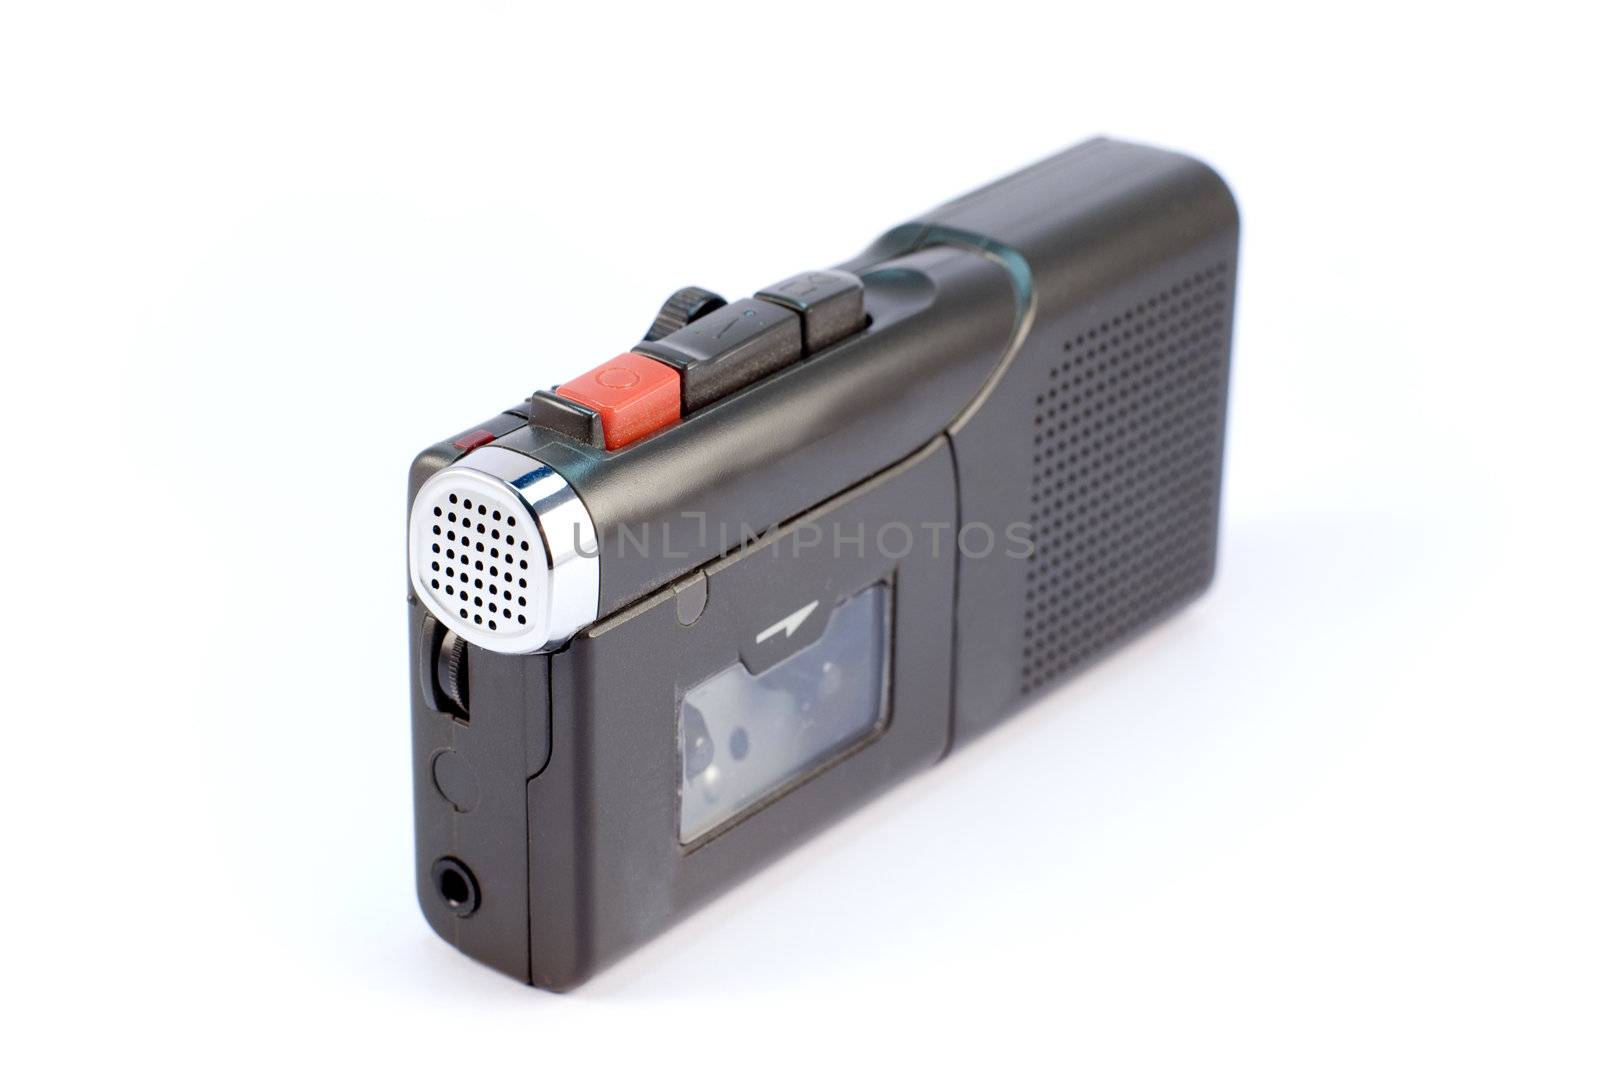 dictaphone by gufoto